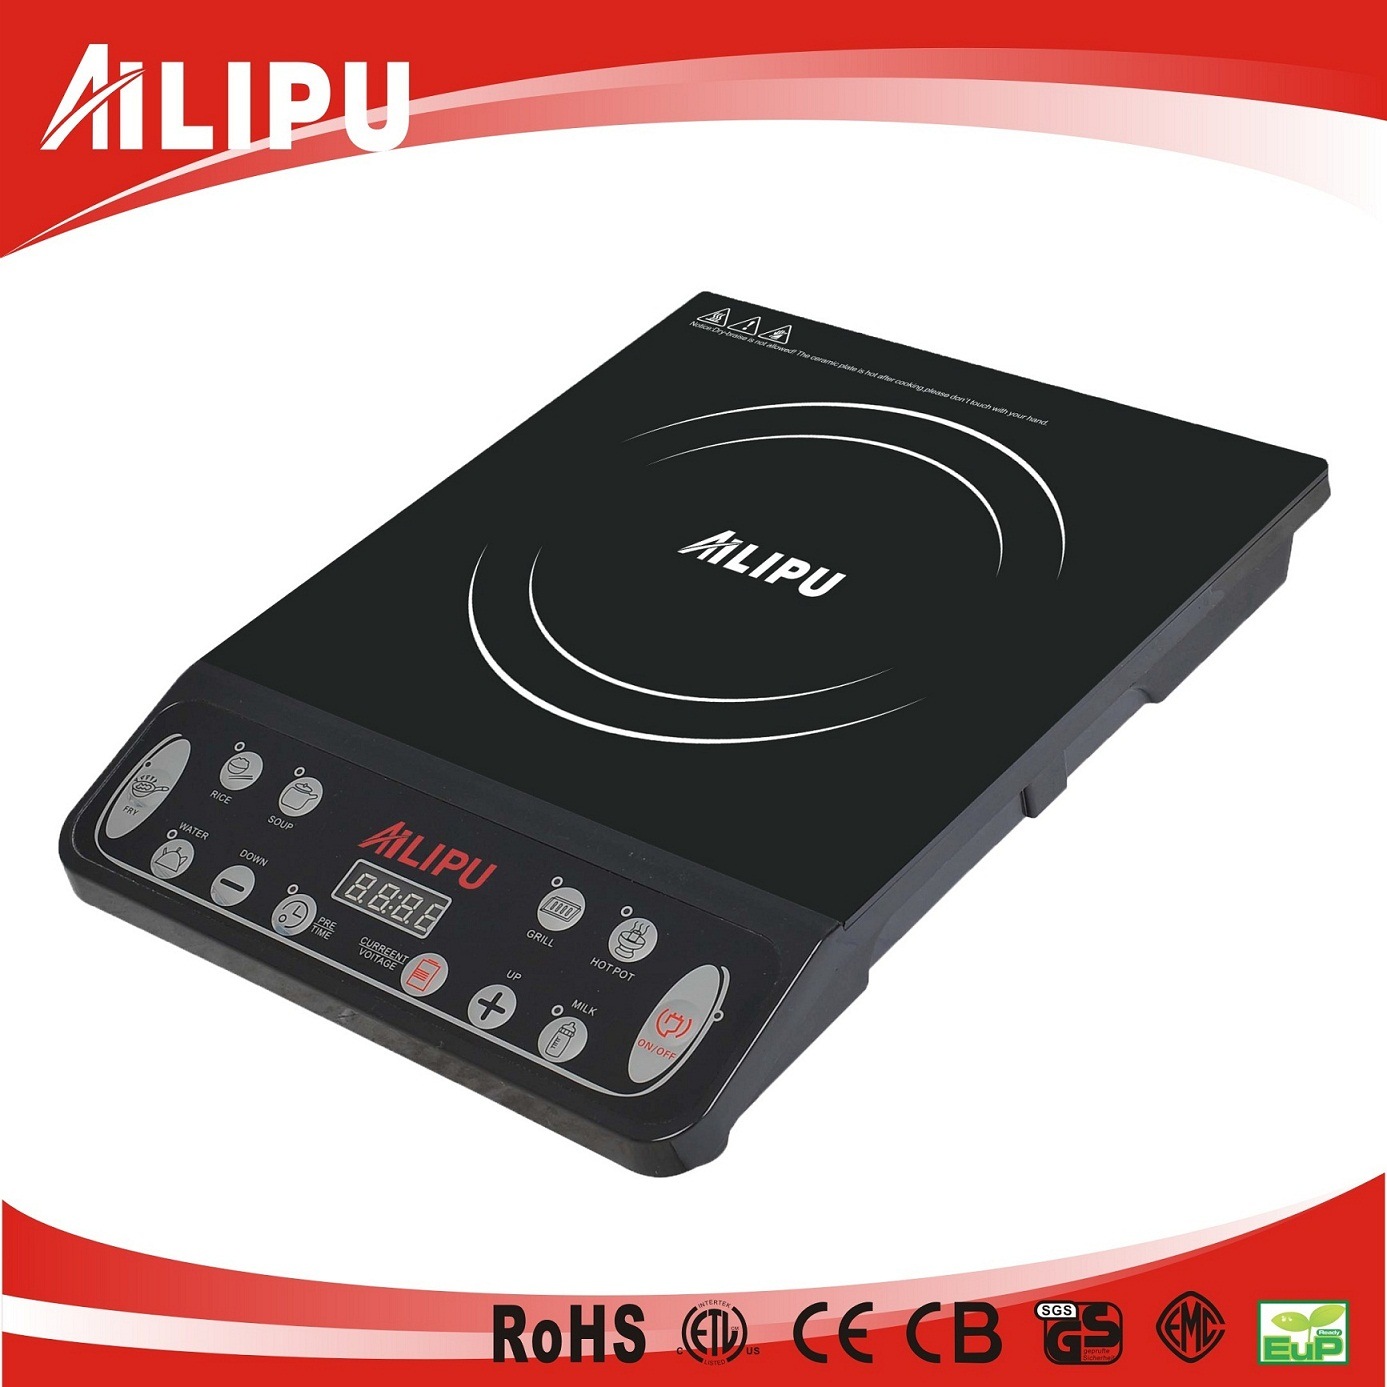 2015 Home Appliance, Kitchenware, Induction Heater, Stove, Hot Pot (SM-A8)